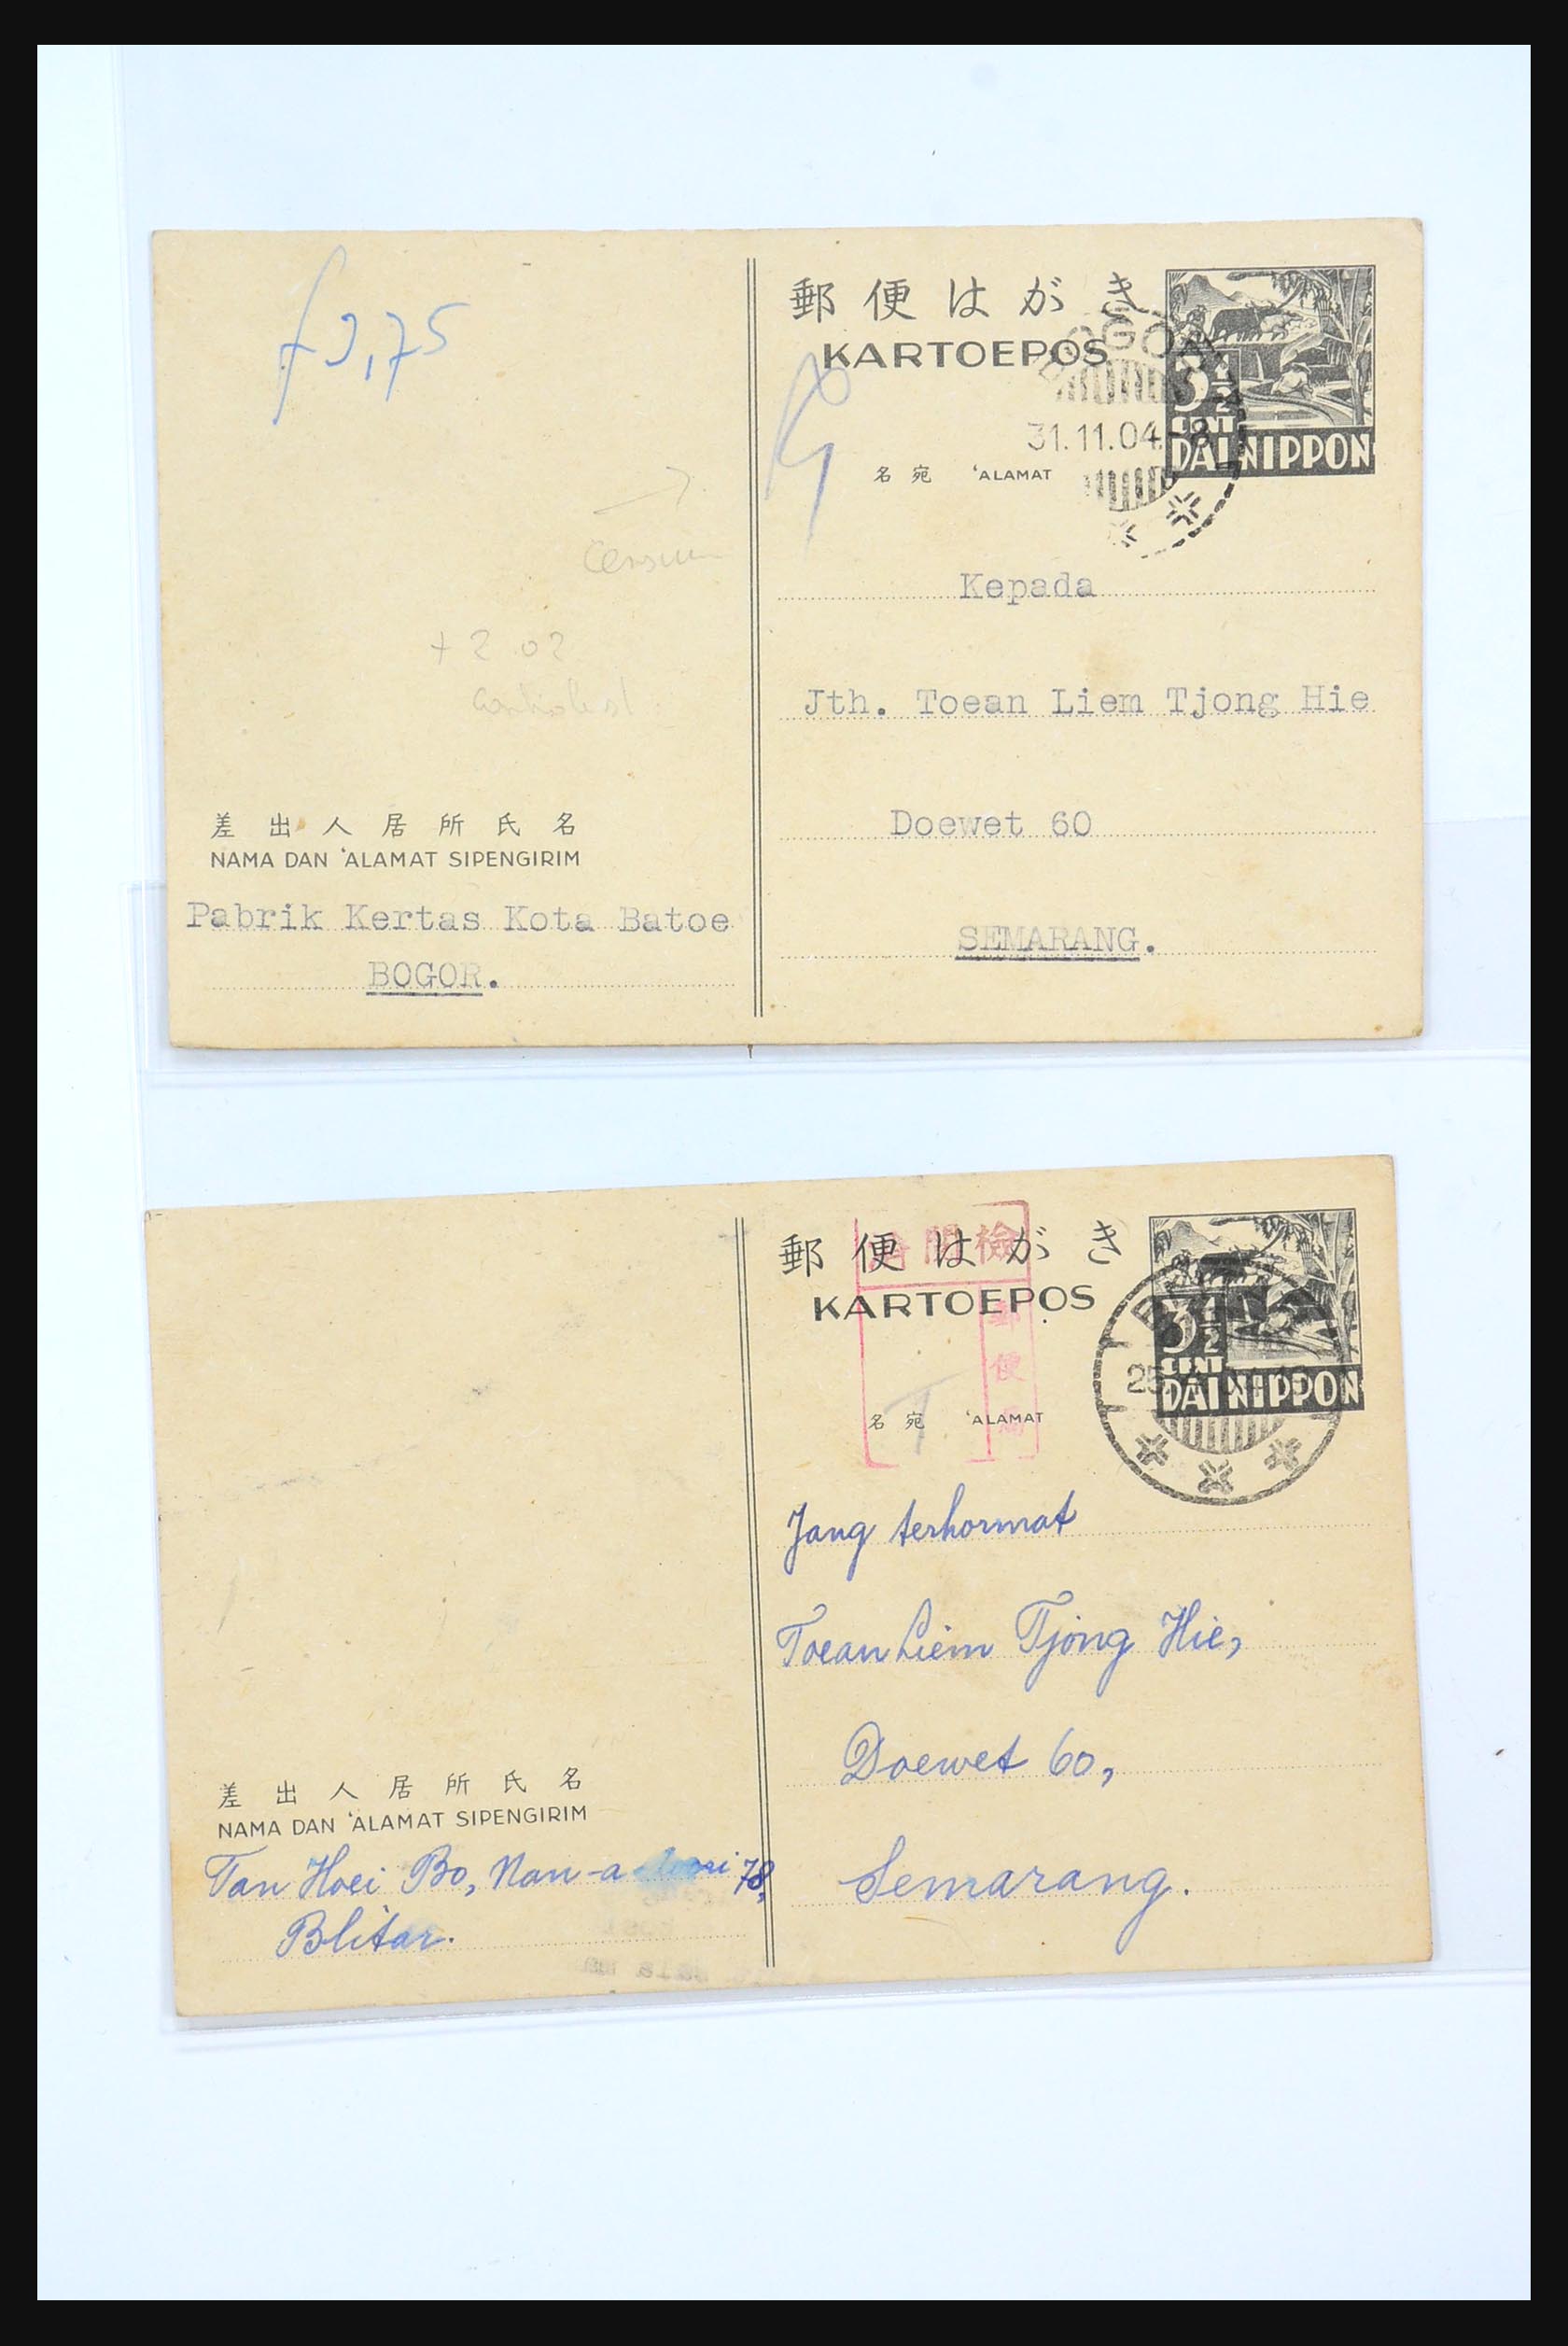 31362 003 - 31362 Netherlands Indies Japanese occupation covers 1942-1945.